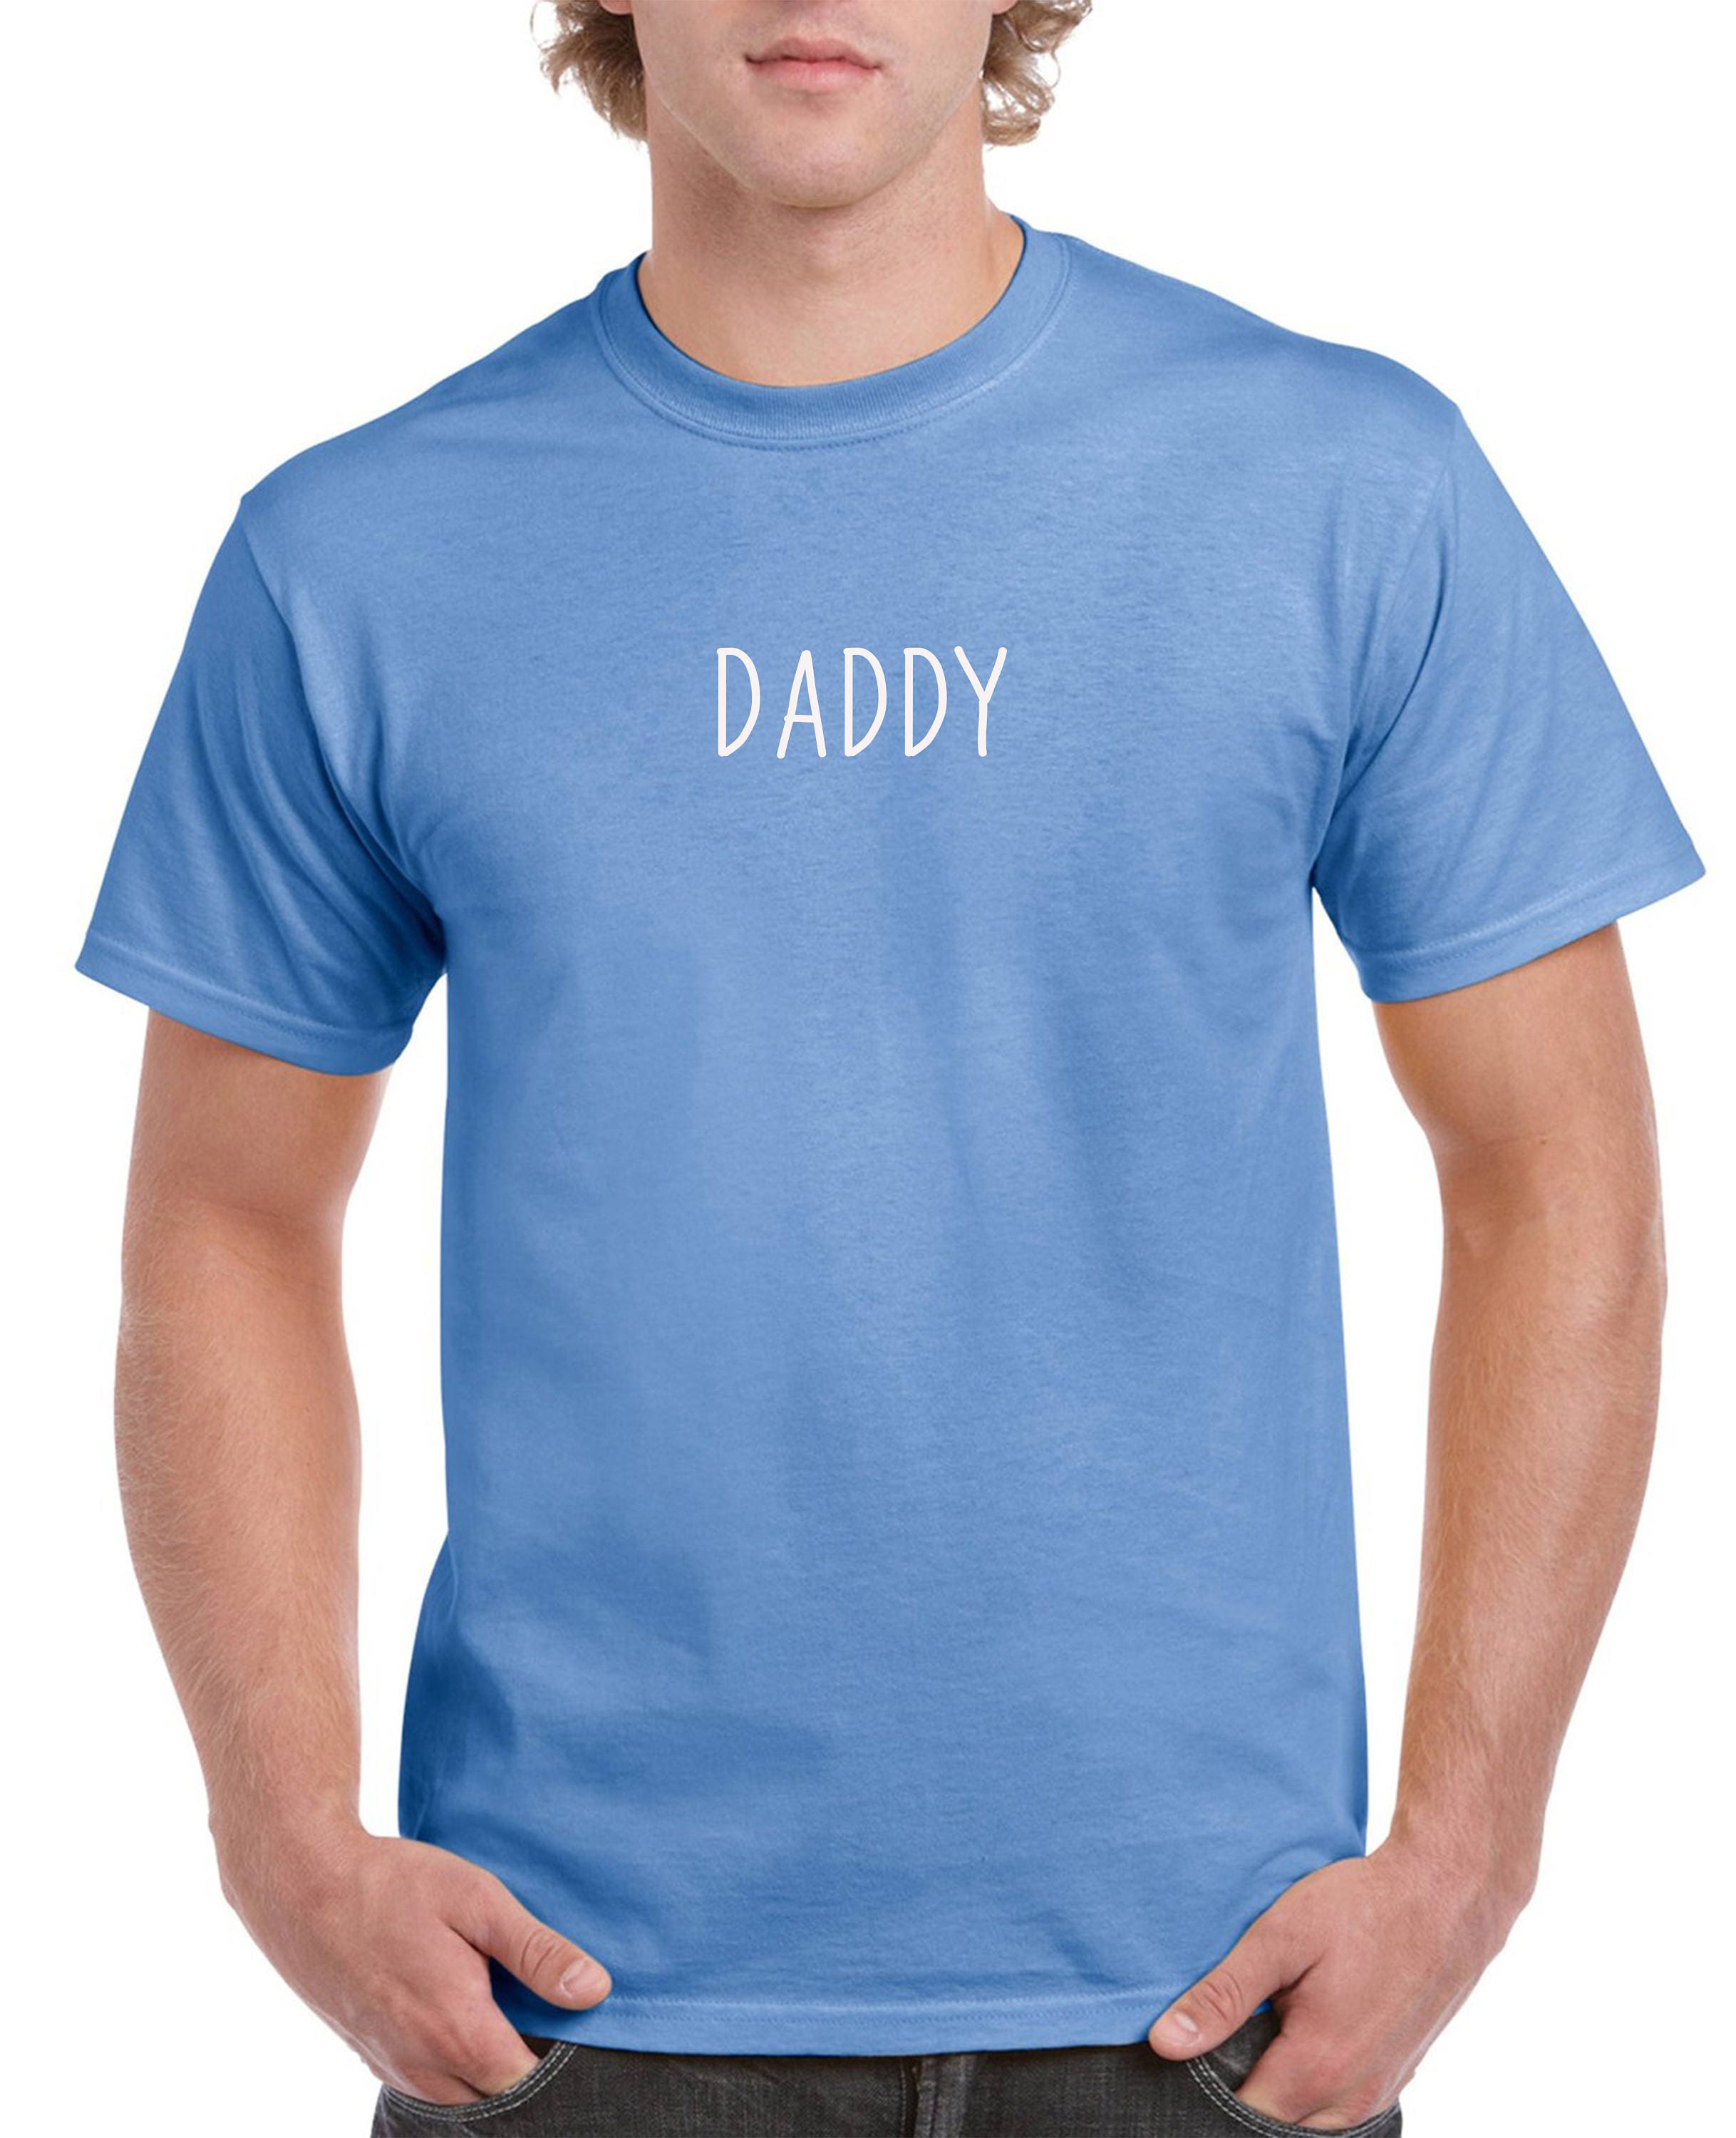 Gender Reveal Matching T-shirt Mommy & Daddy T-shirts Mom | Etsy